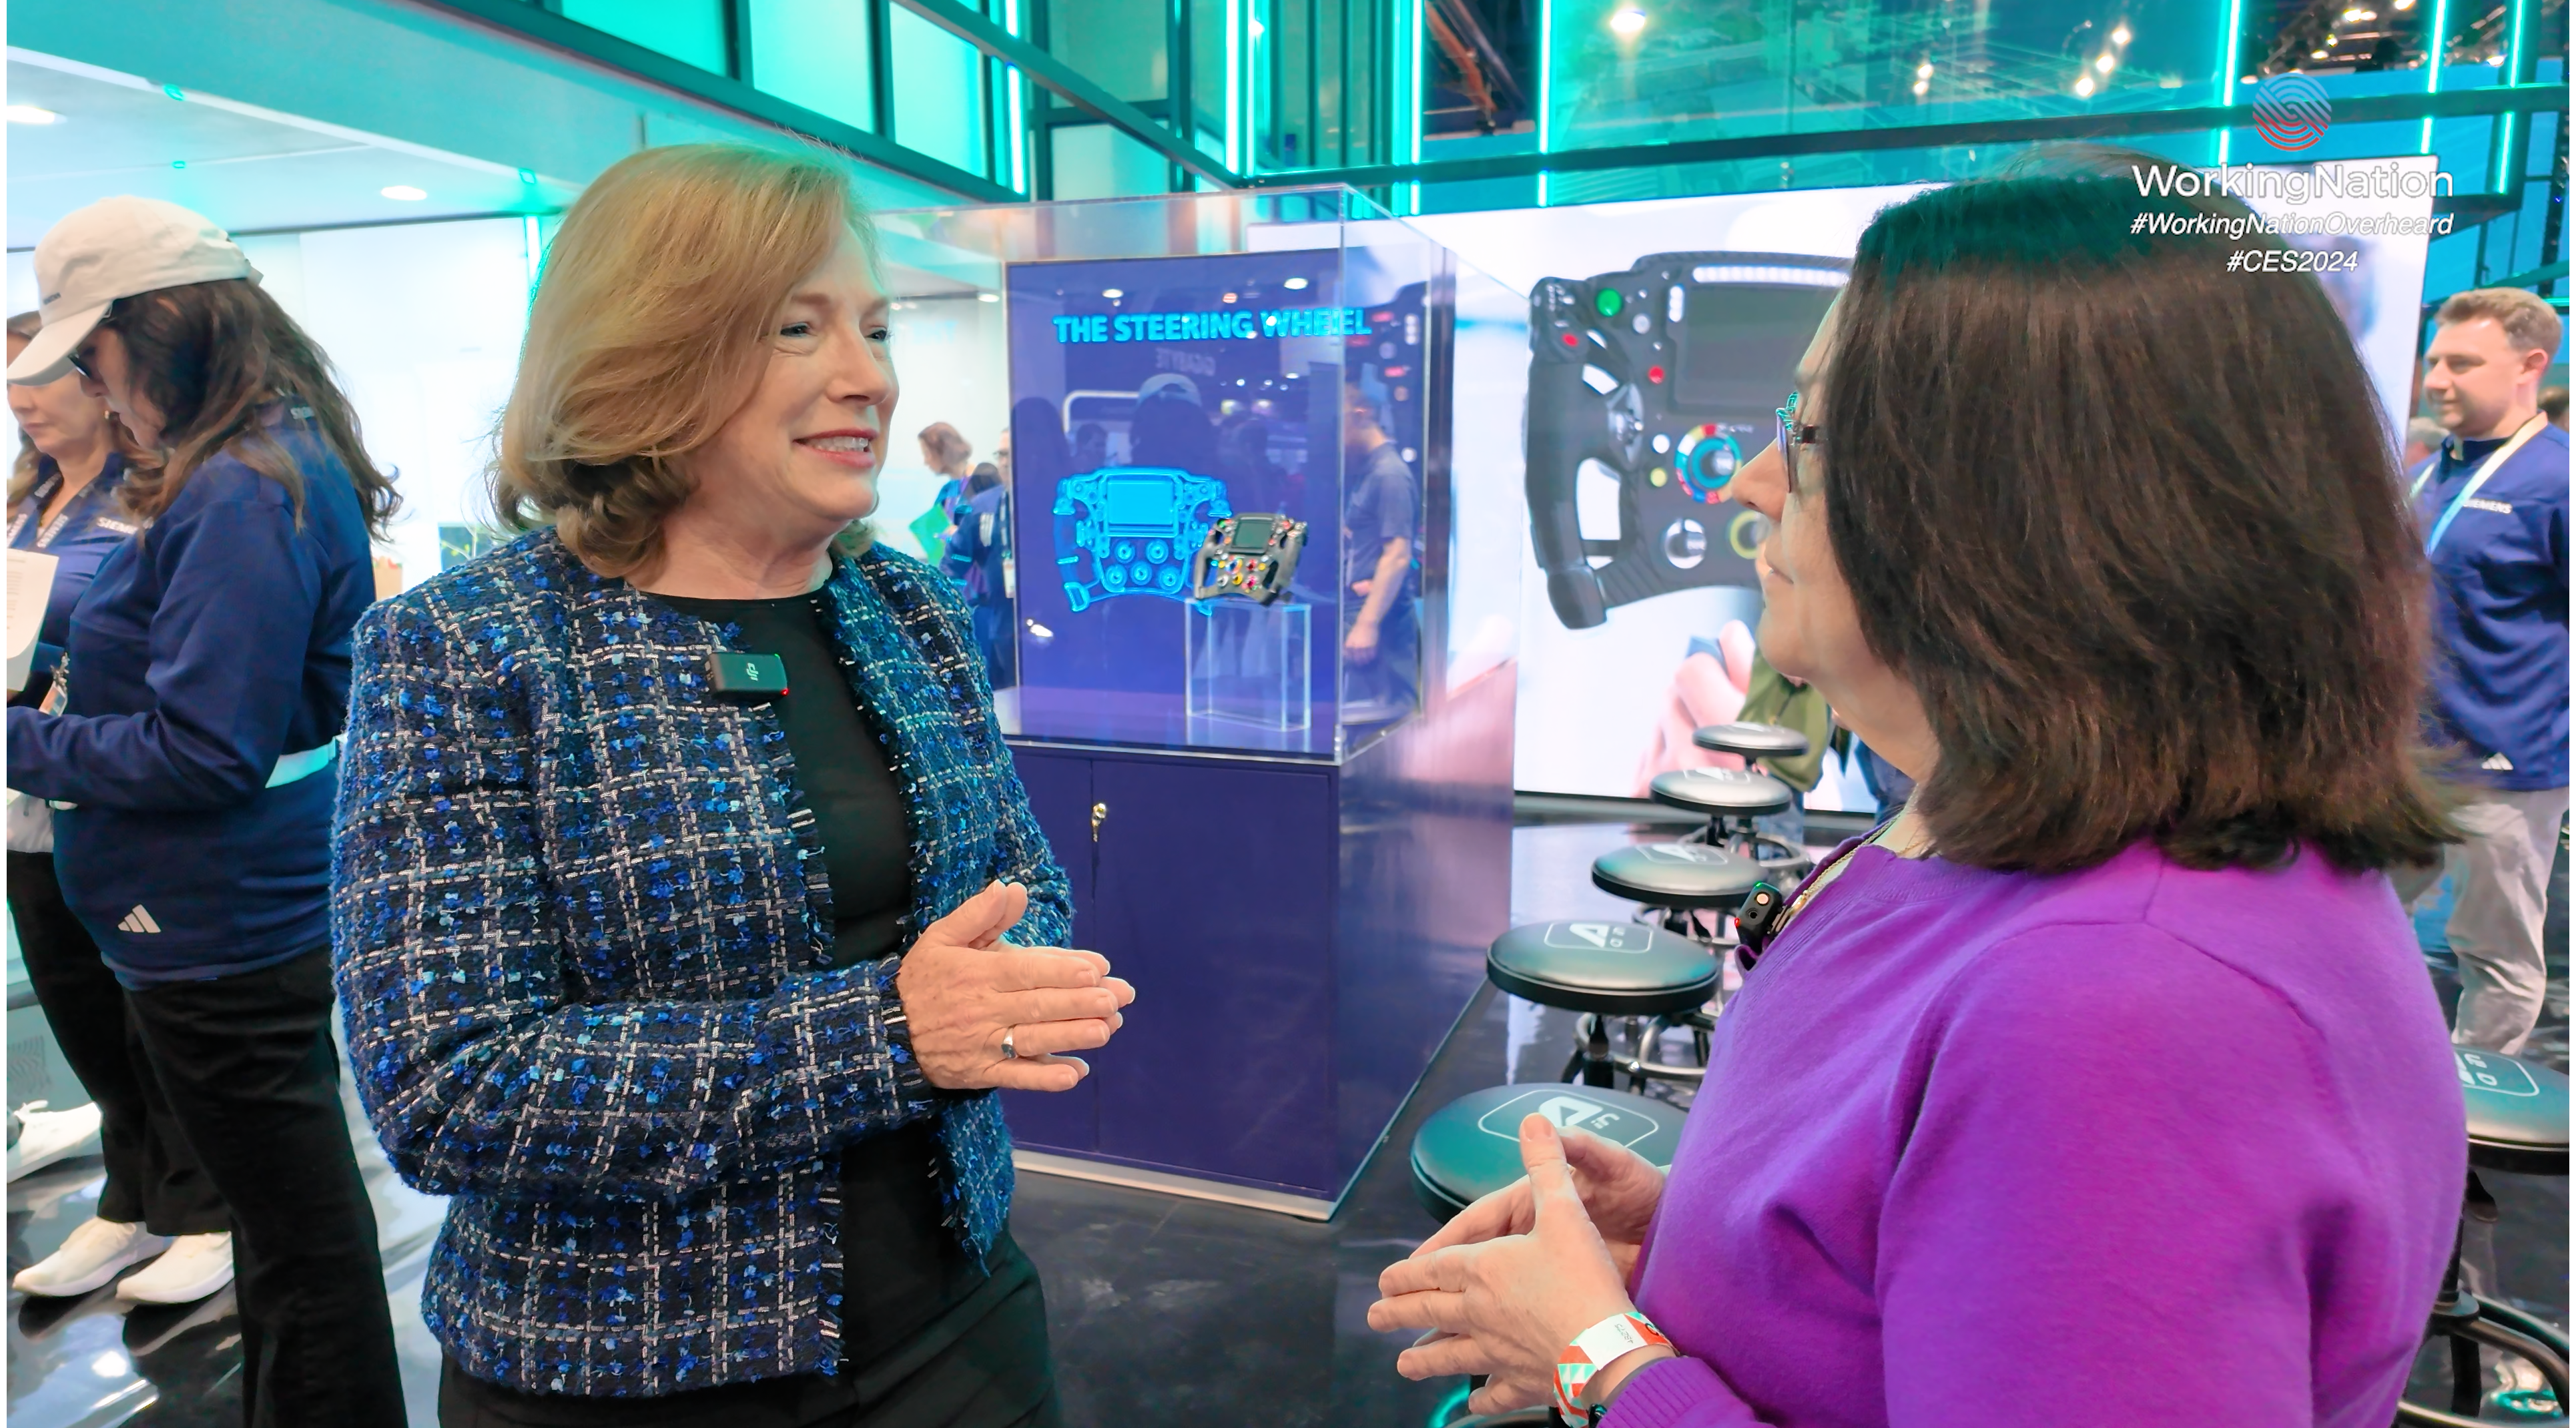 Siemens USA Barbara Humpton talks with WorkingNation editor-in-chief Ramona Schindelheim at CES 2024 about creating a tech-ready workforce in manufacturing